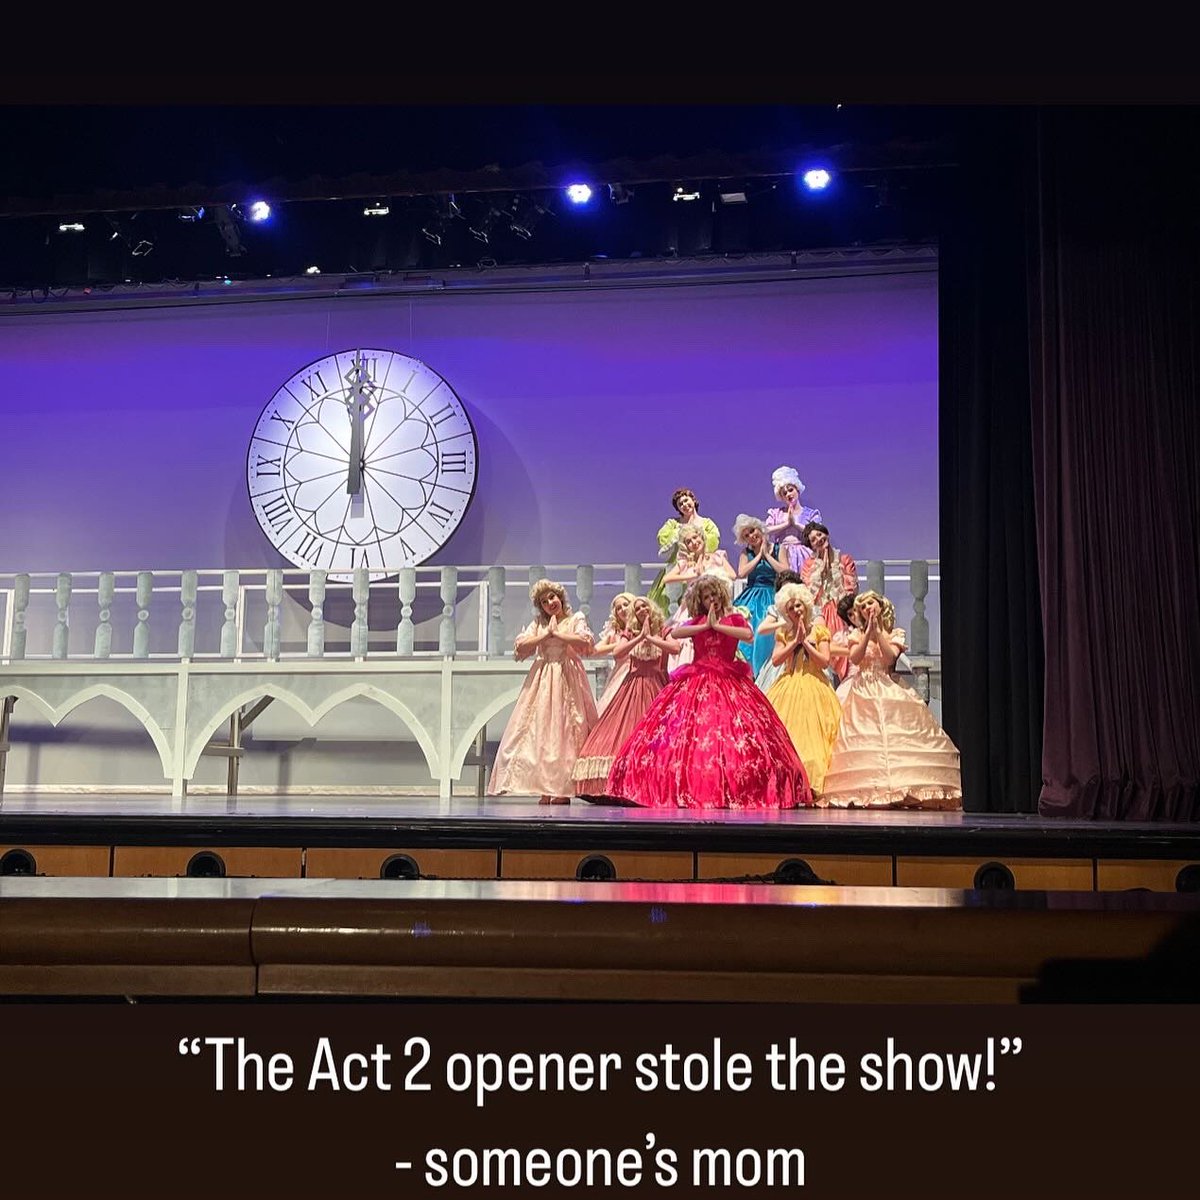 The reviews are in: CINDERELLA is a spectacular! Opening night was a dream come true. We are having a ball on stage, and hope that you will join the fun! Don’t miss out on your chance to see this amazing cast, crew, and pit. Get your tickets today before it’s impossible!